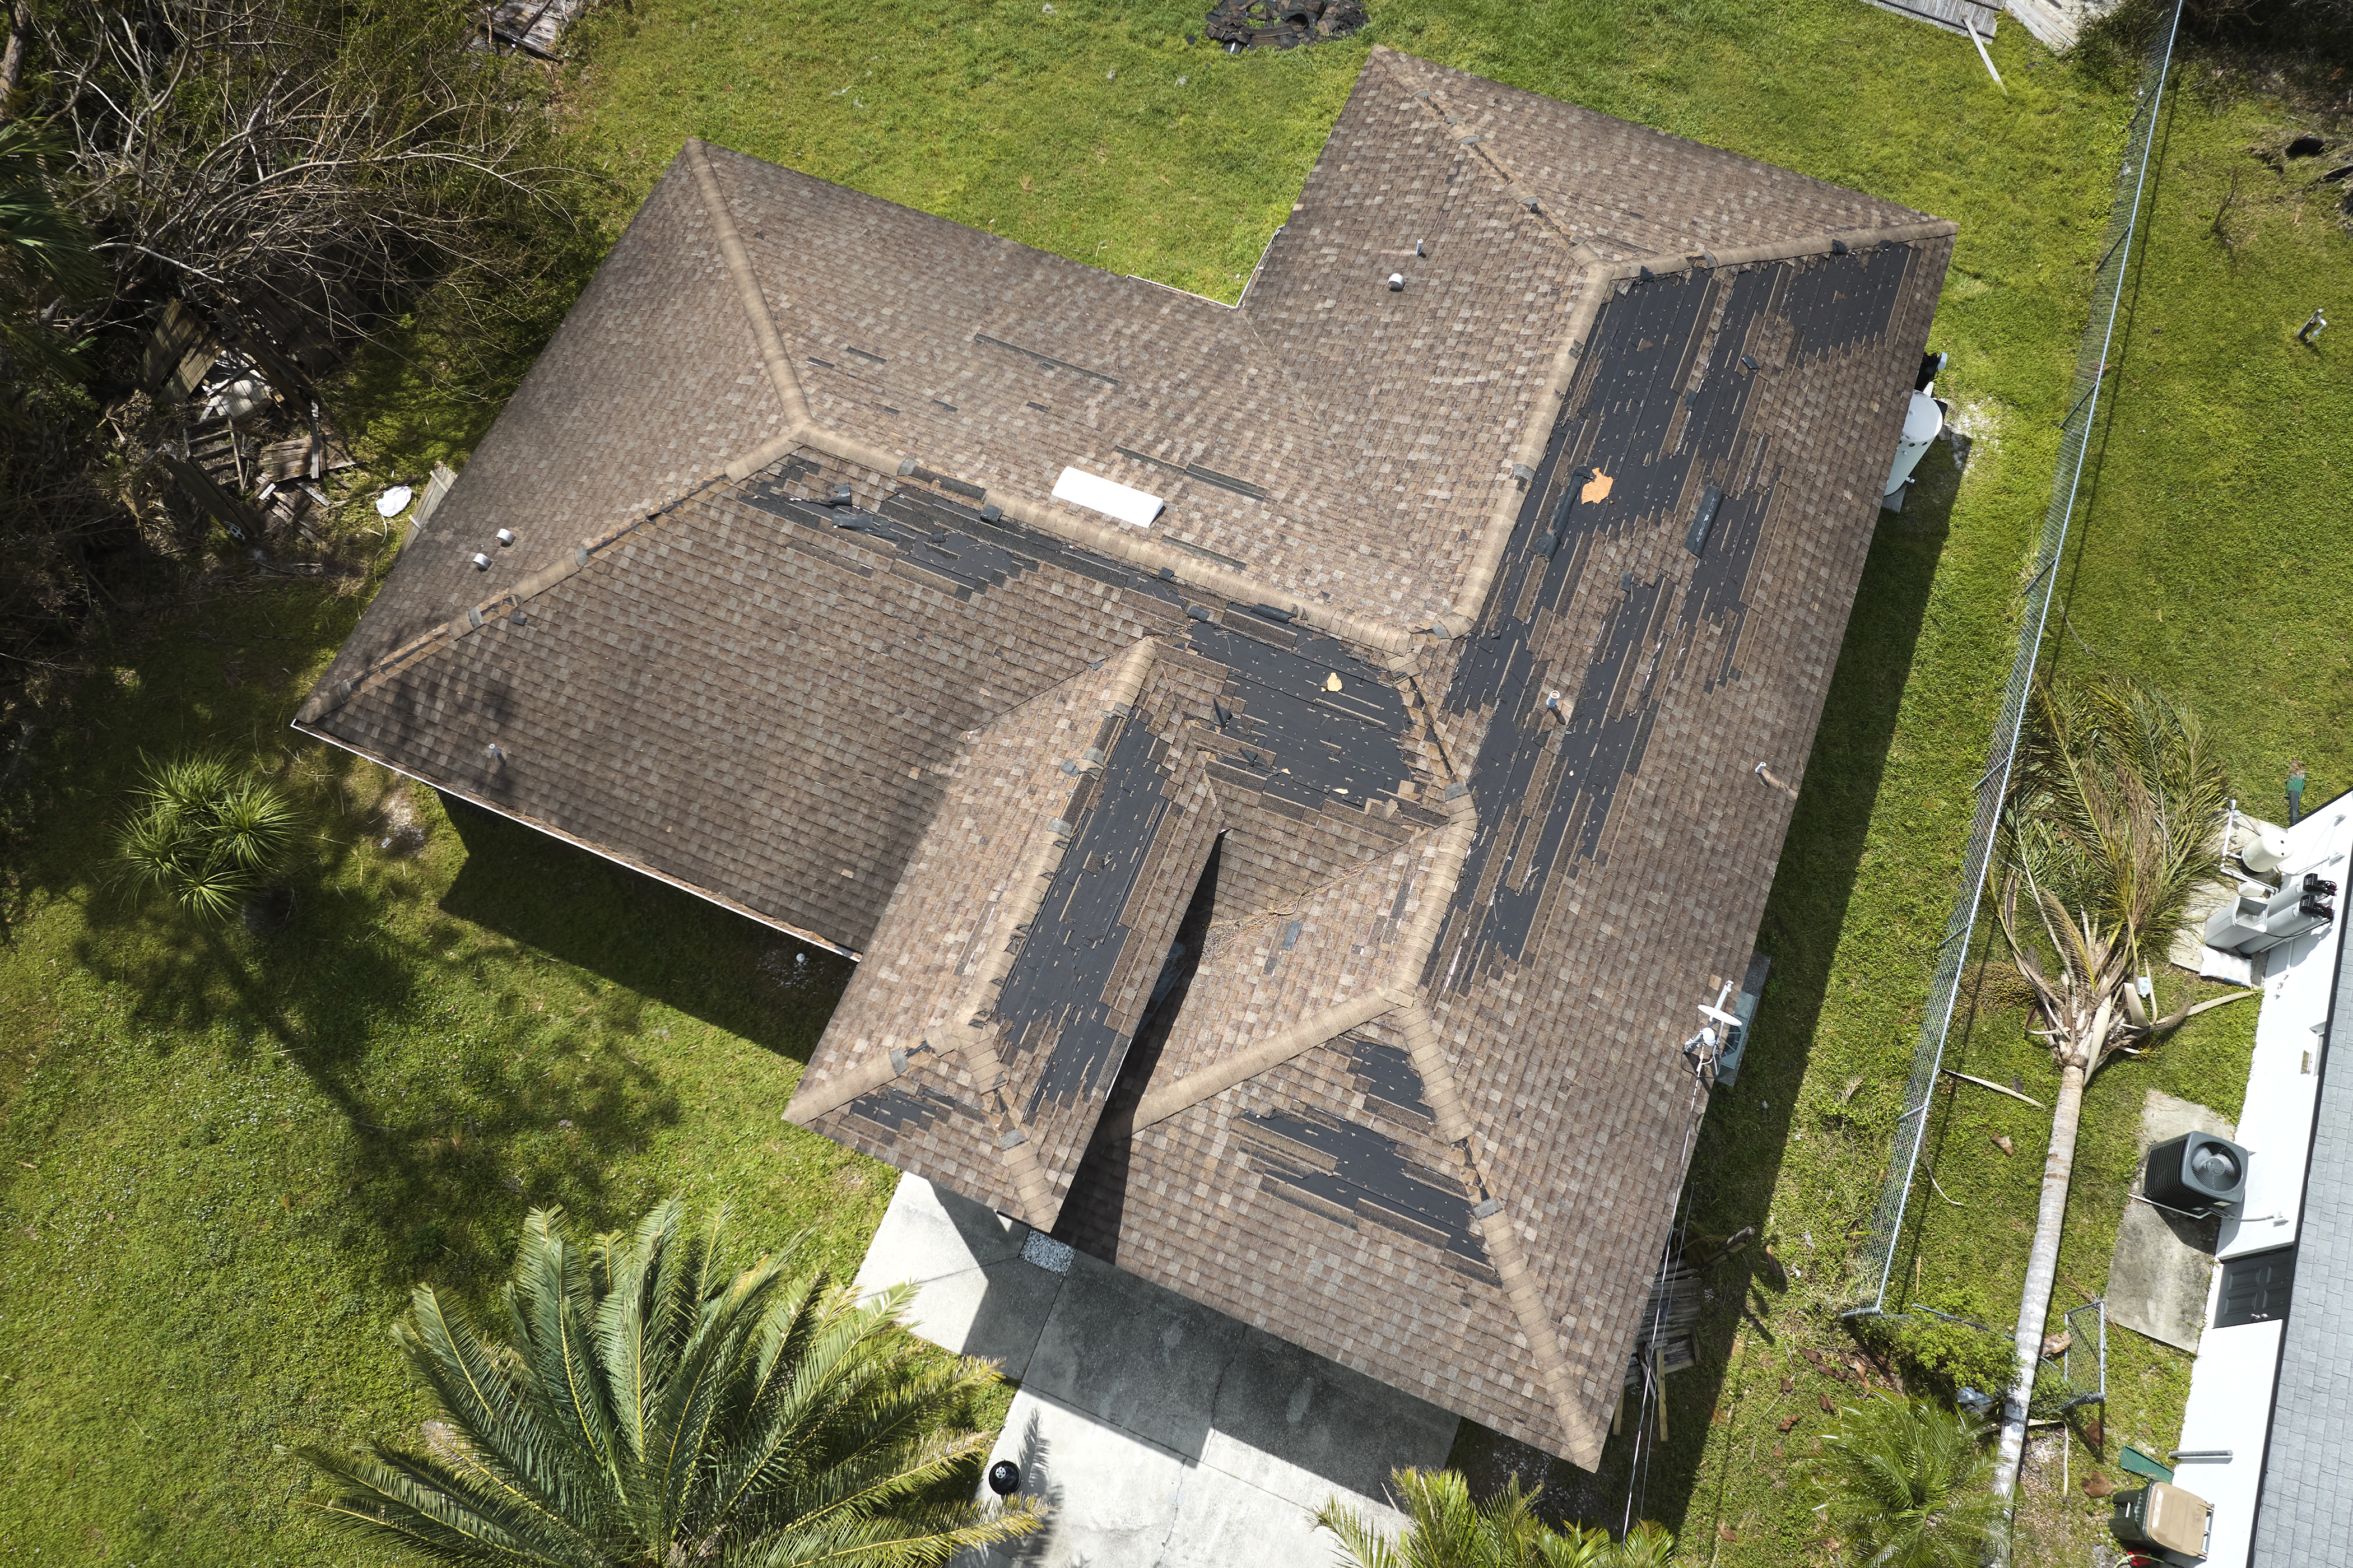 roof inspections